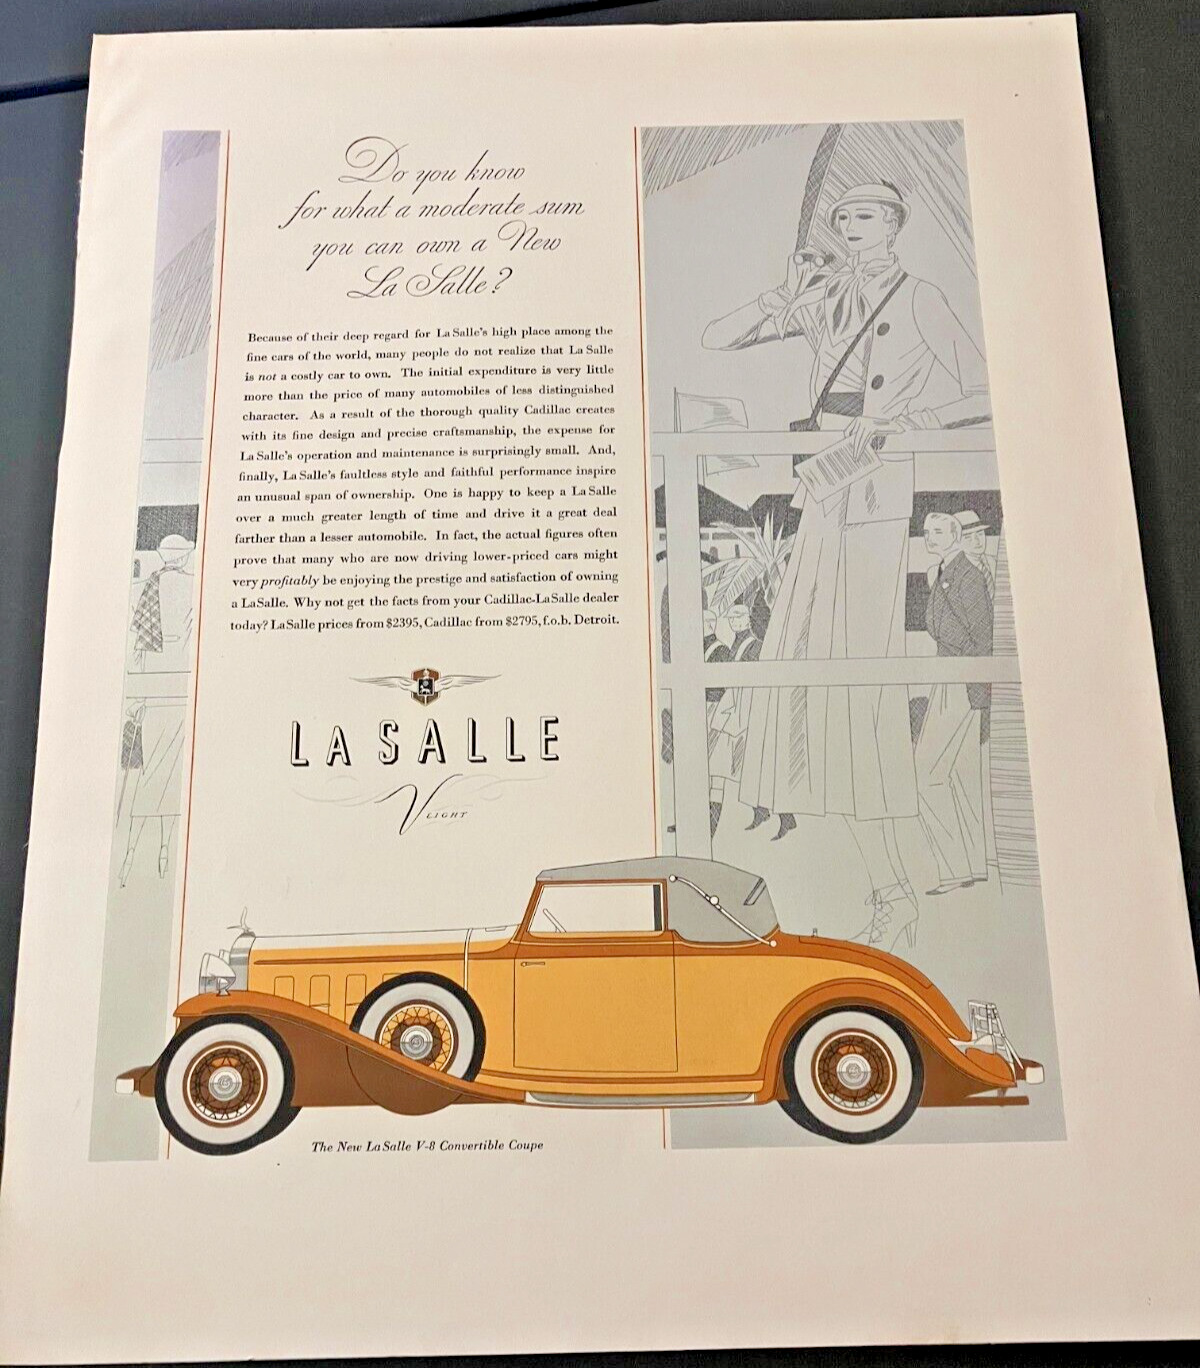 1932 LaSalle V-8 Convertible Coupe Vintage Print Ad Wall Art Metallic Silver Ink